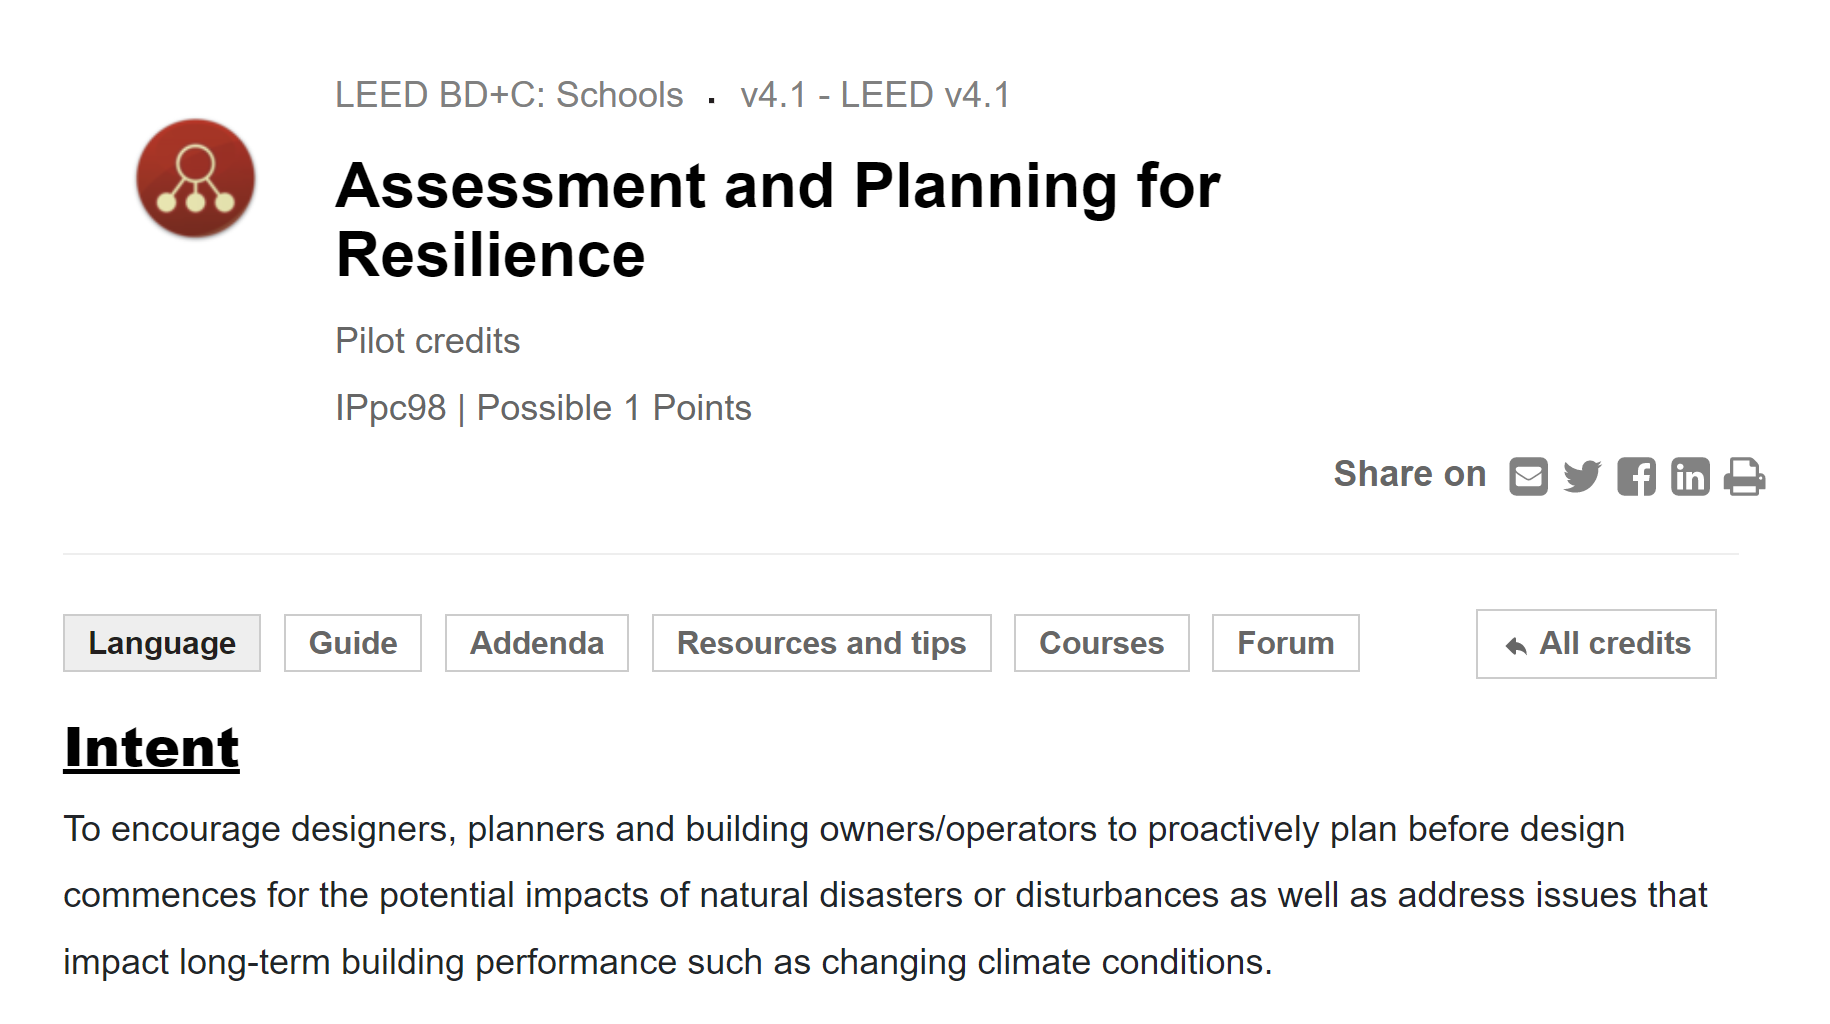 Top of page with title "Assessment and Planning for Resilience"